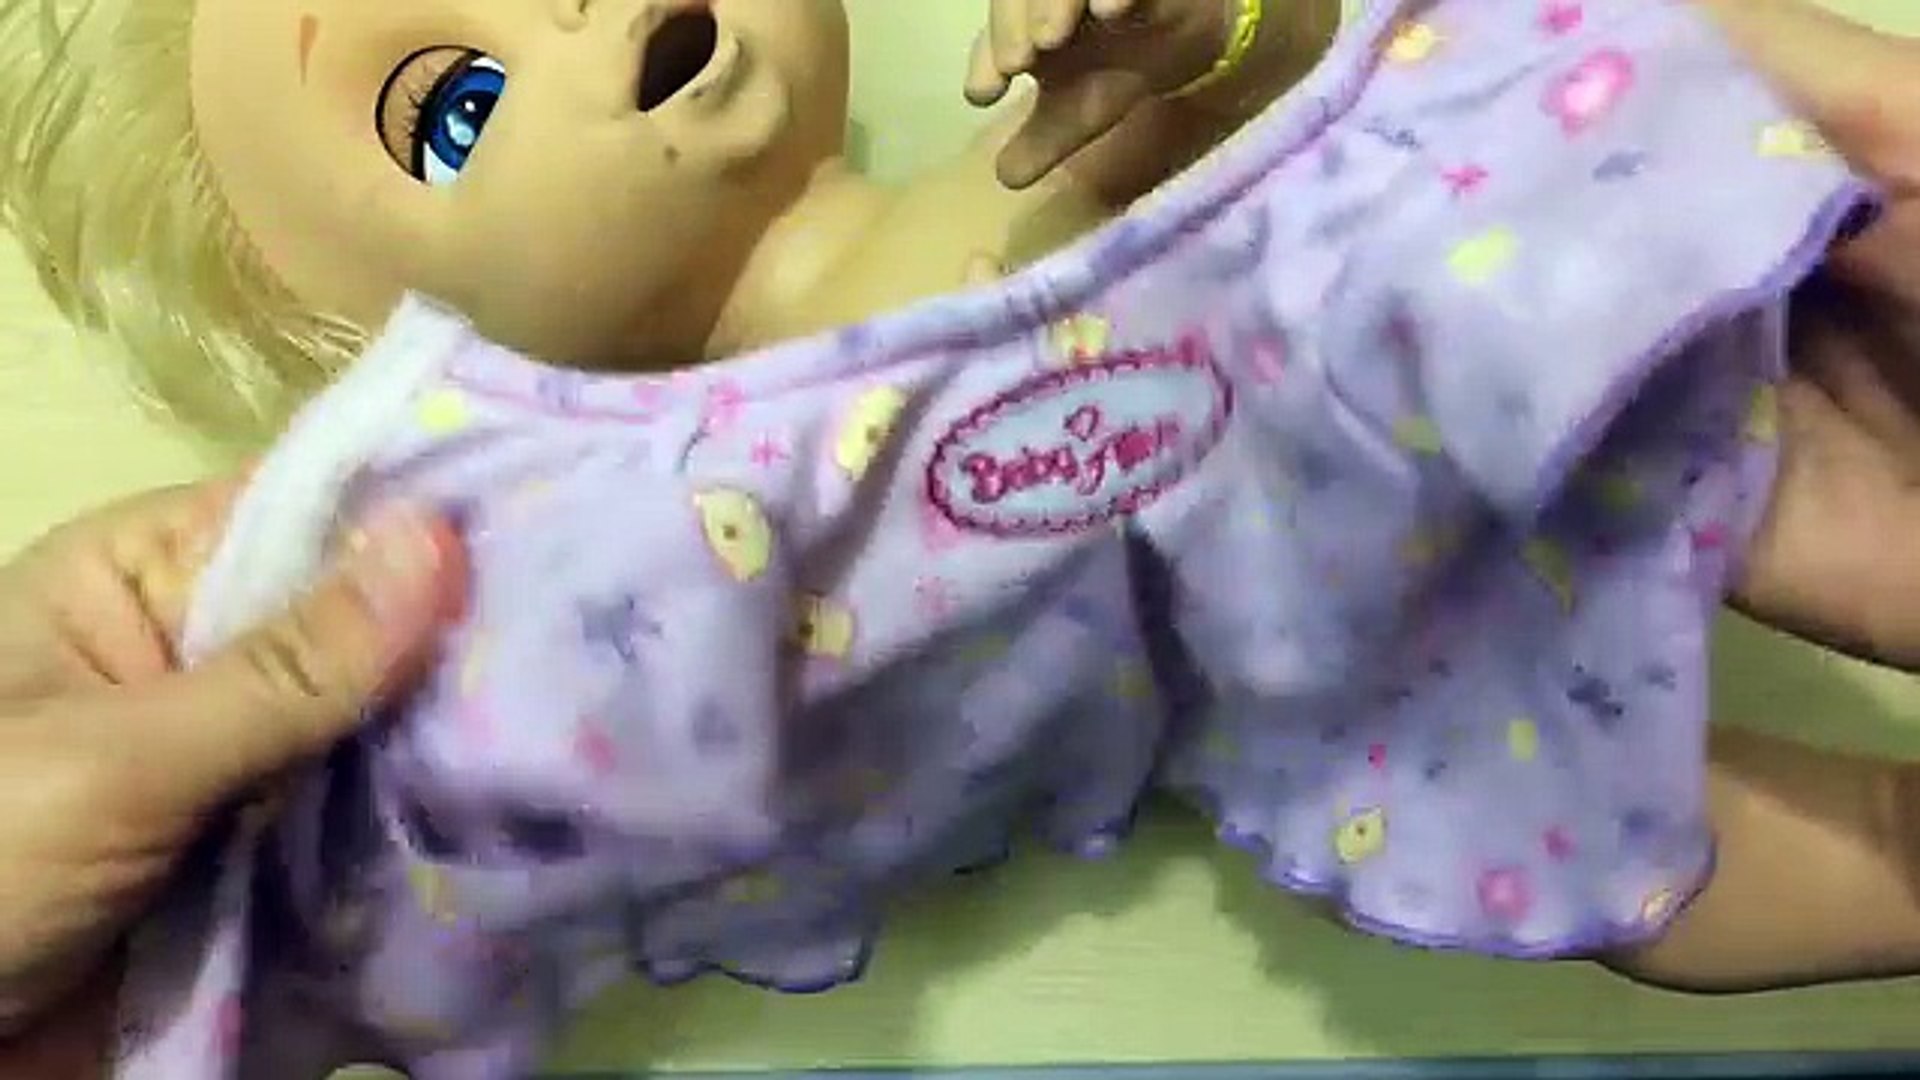 Baby Alive 2006 Soft Face Doll Unboxing and Details! Disappointment! Does  She Even Work?! - Dailymotion Video